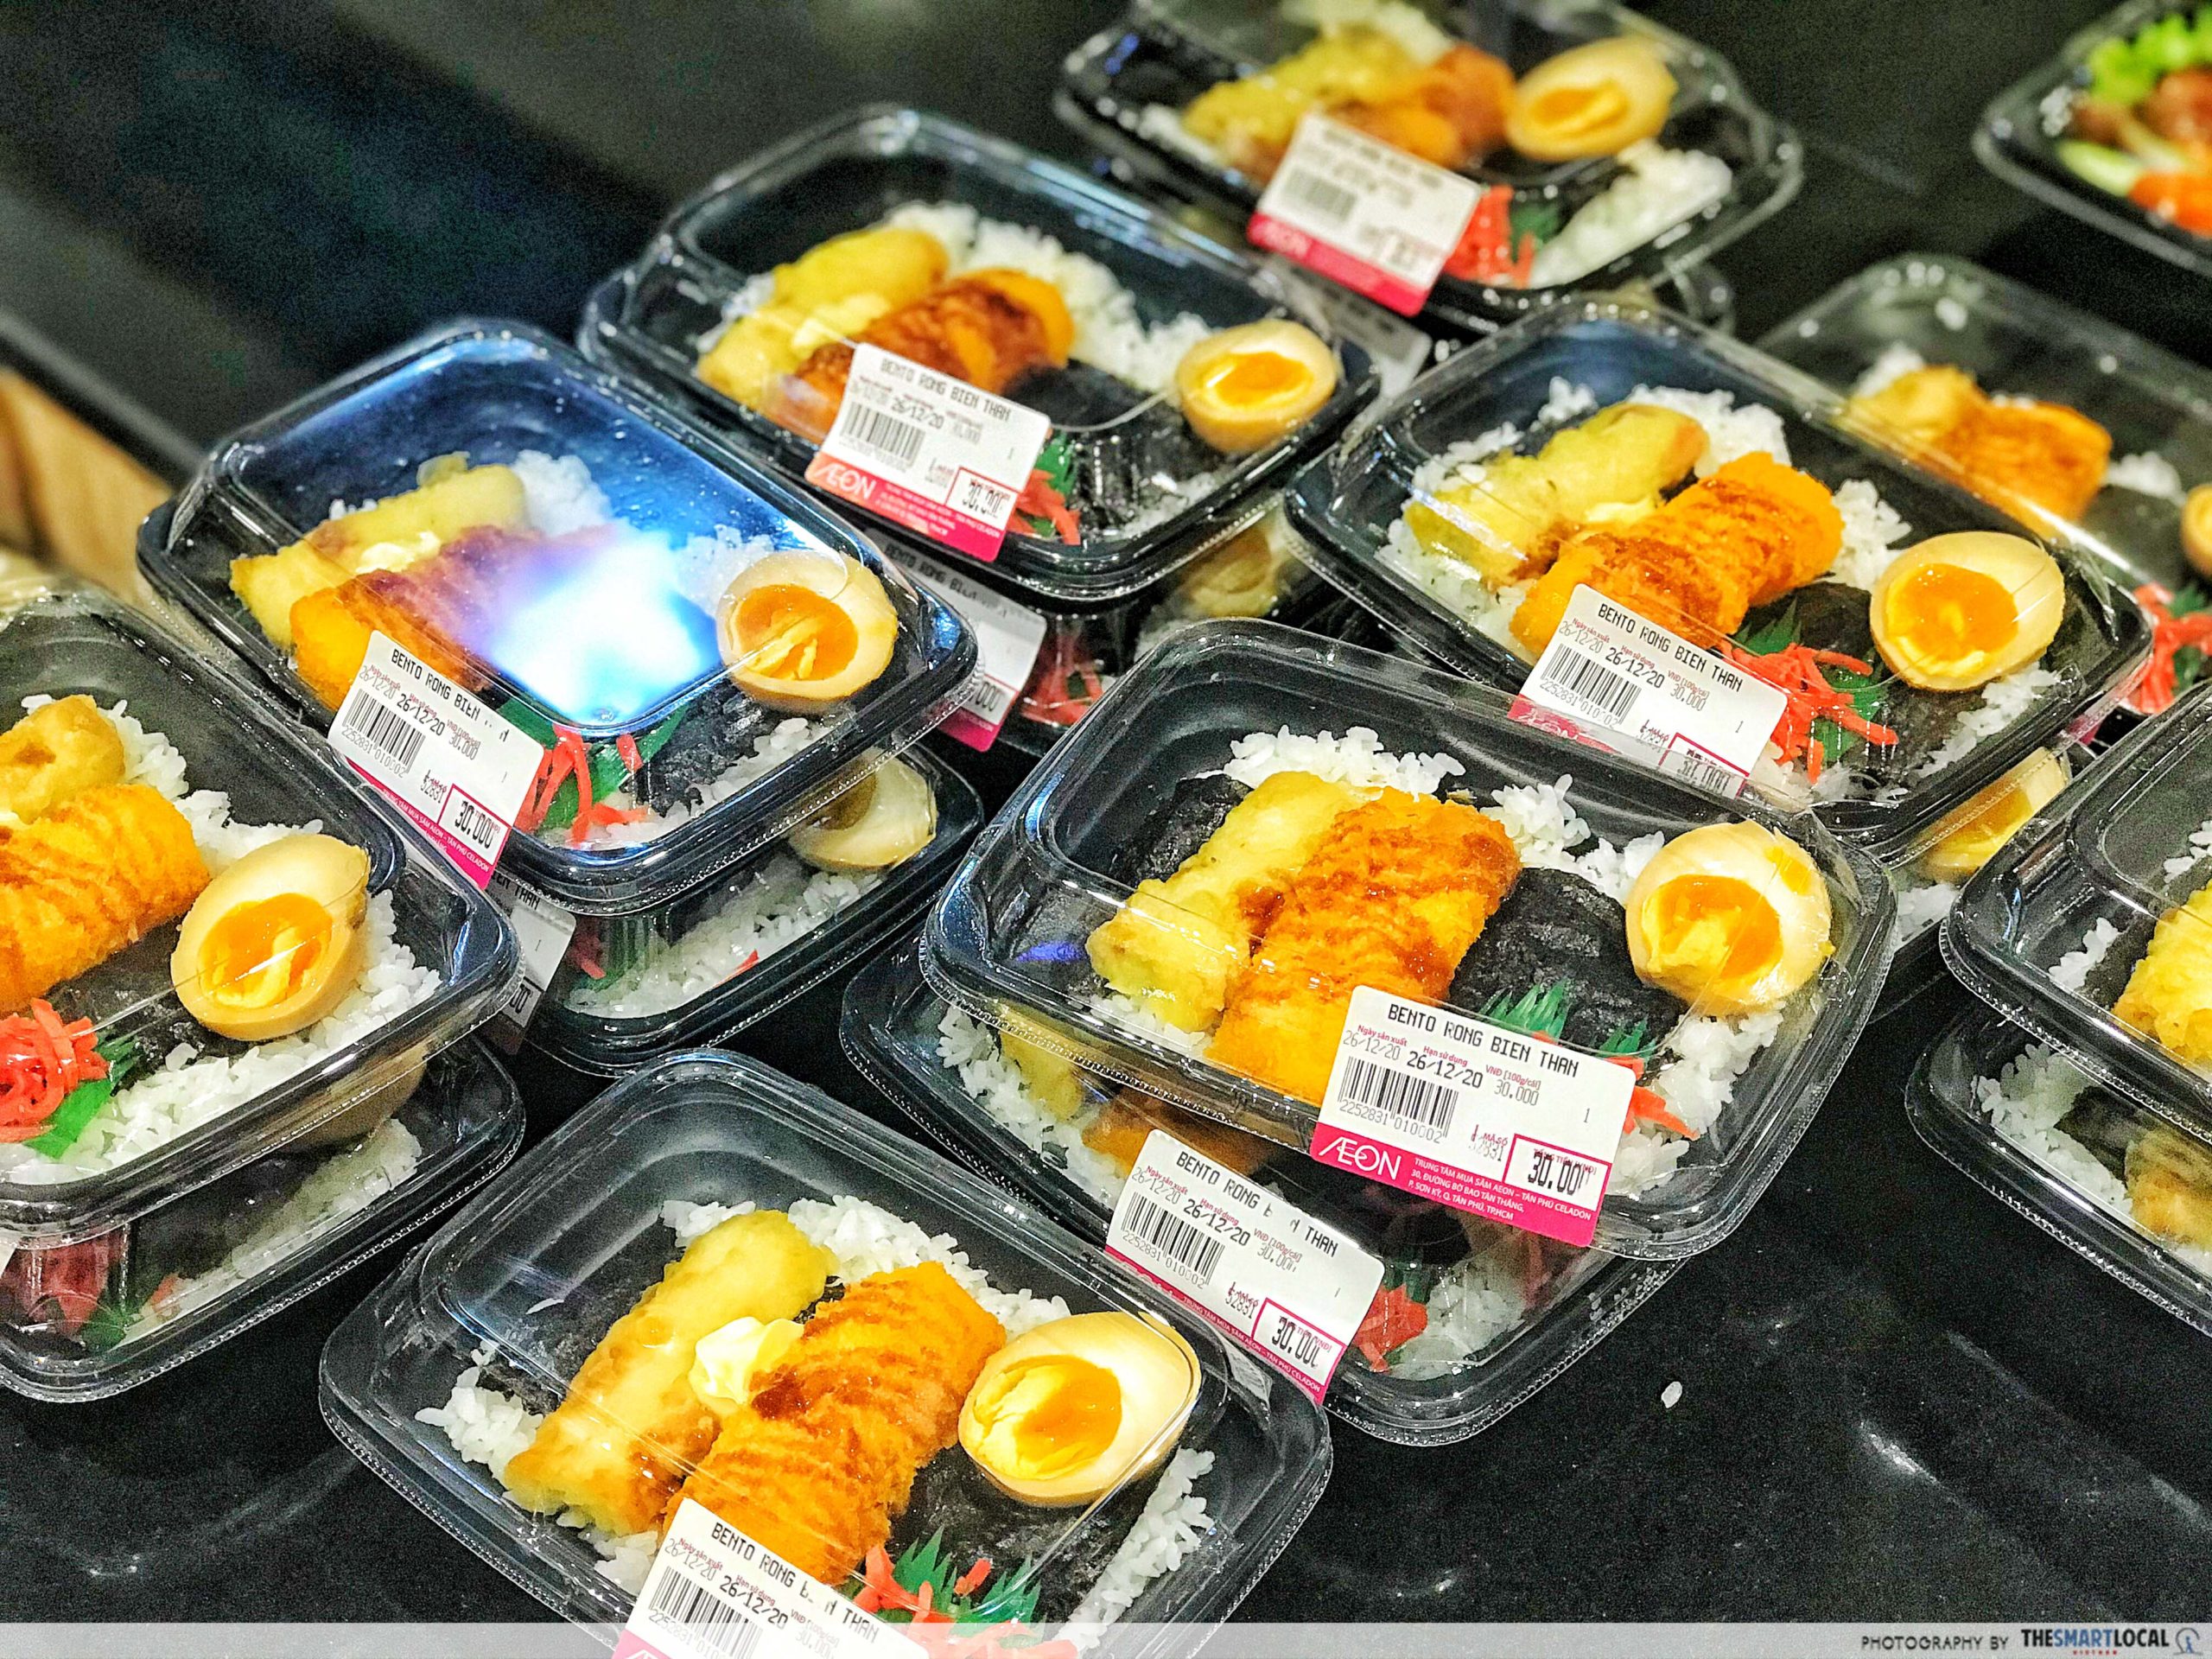 AEON MALL MEAL BOXES